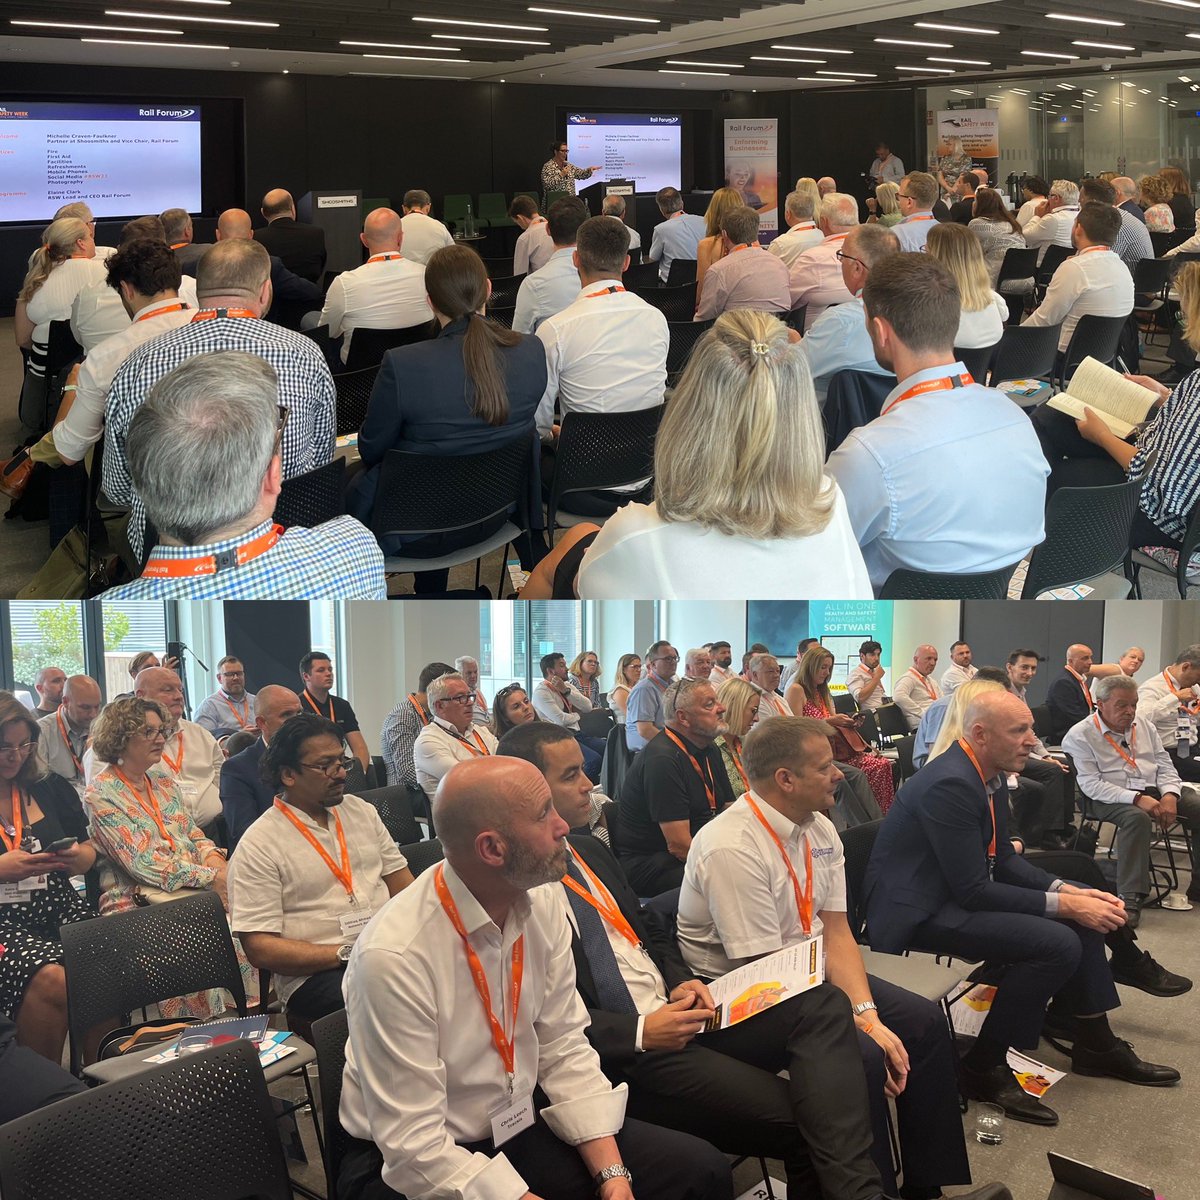 Delighted to welcome so many colleagues across the industry to our @RailSafetyWeek launch conference. A big thank you to our event partners @tended, @work_wallet & @qssgroup & our host @Shoosmiths! #RSW23 #BuildingSafetyTogether